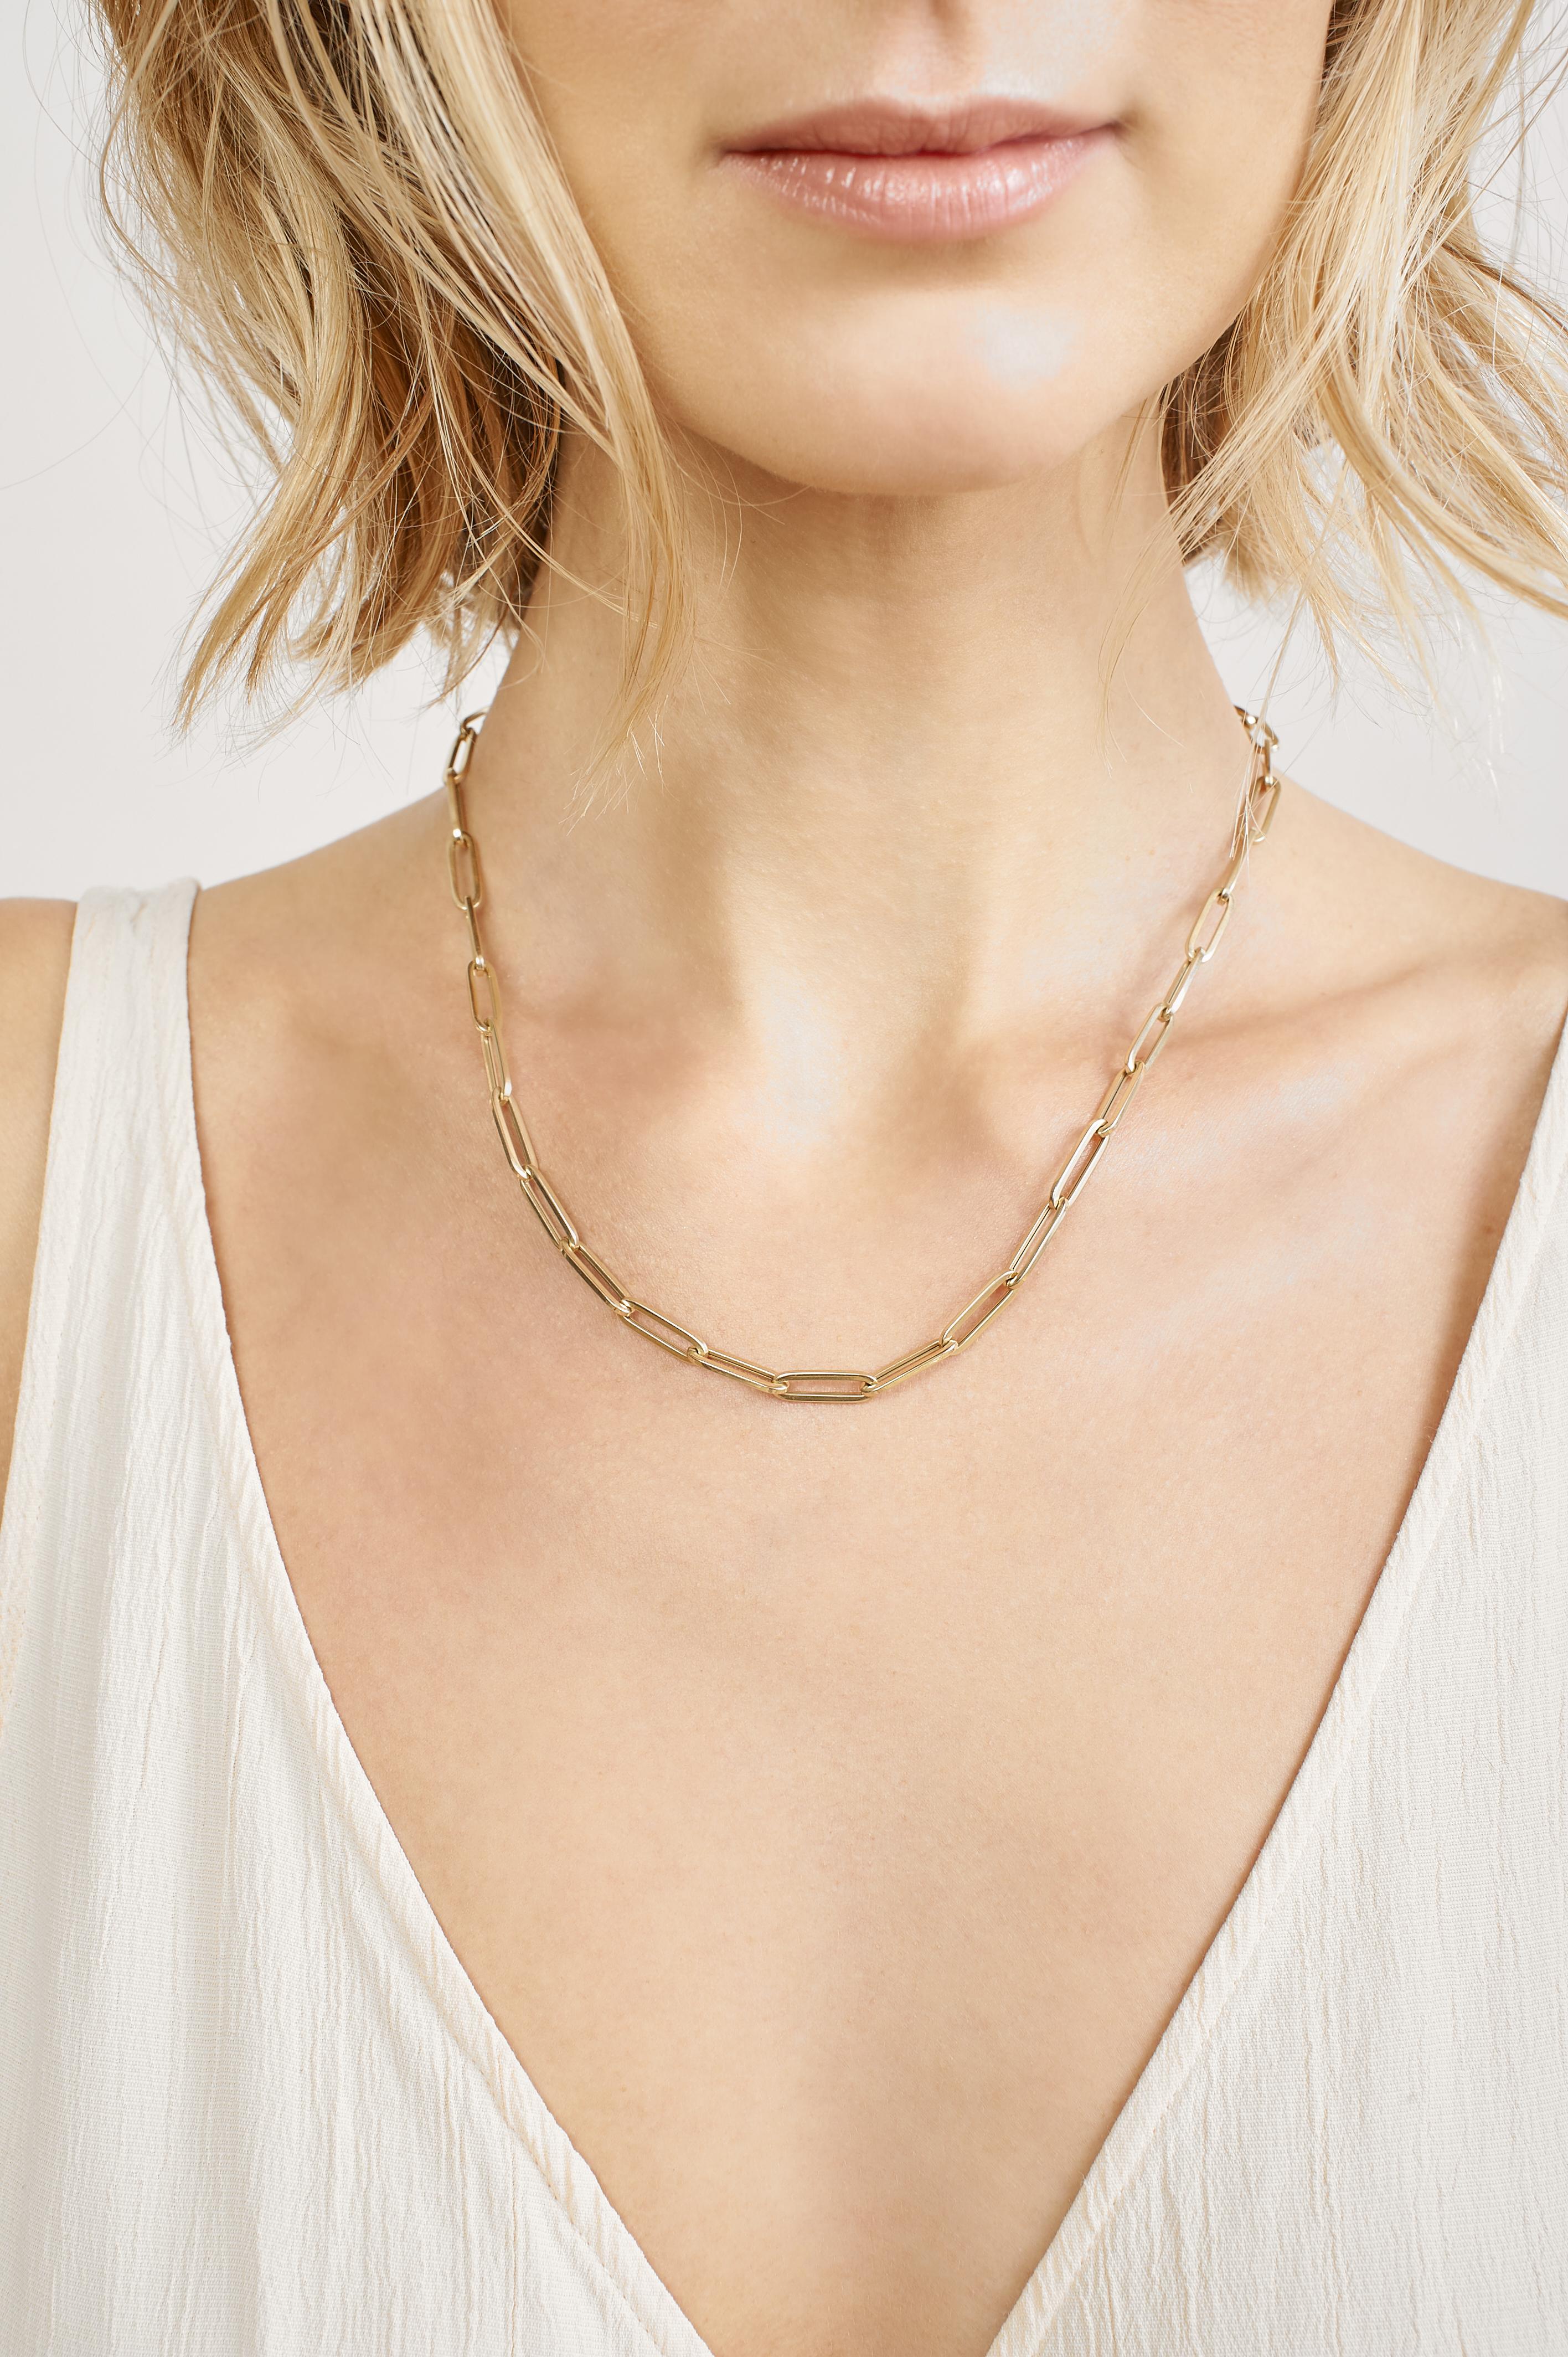 Paper Clip Chain Necklace in Solid 14 Karat White Gold by Selin Kent In New Condition For Sale In New York, NY